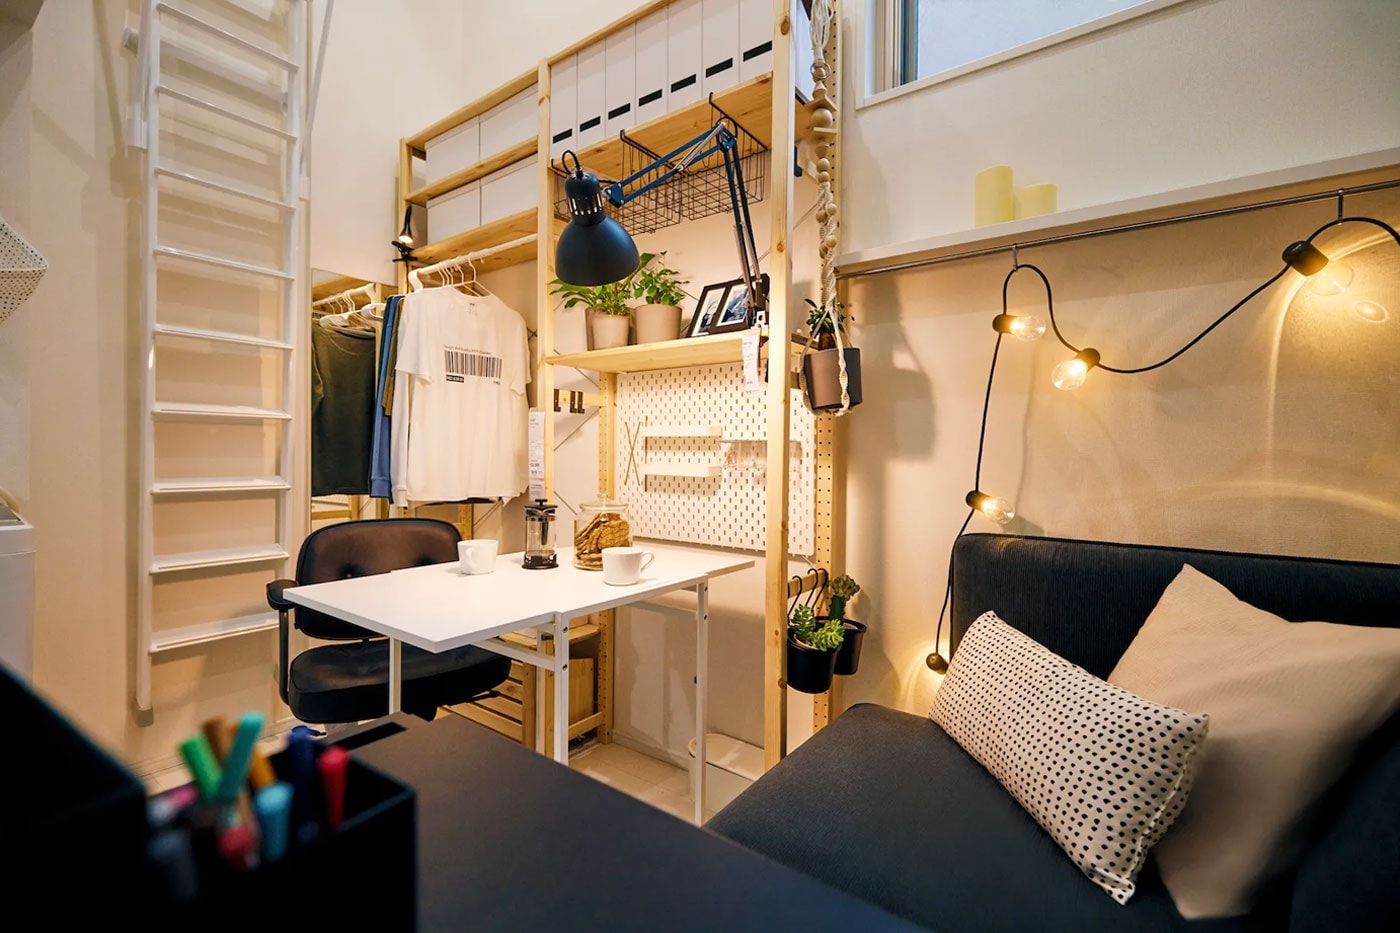 IKEA Japan Is Renting "Tiny Homes" in Tokyo for Under $1 USD a Month Blahaj shark real estate agent four episodes 99 JPY ivar storage muddus drop leaf table trotten wifi speaker lamp news